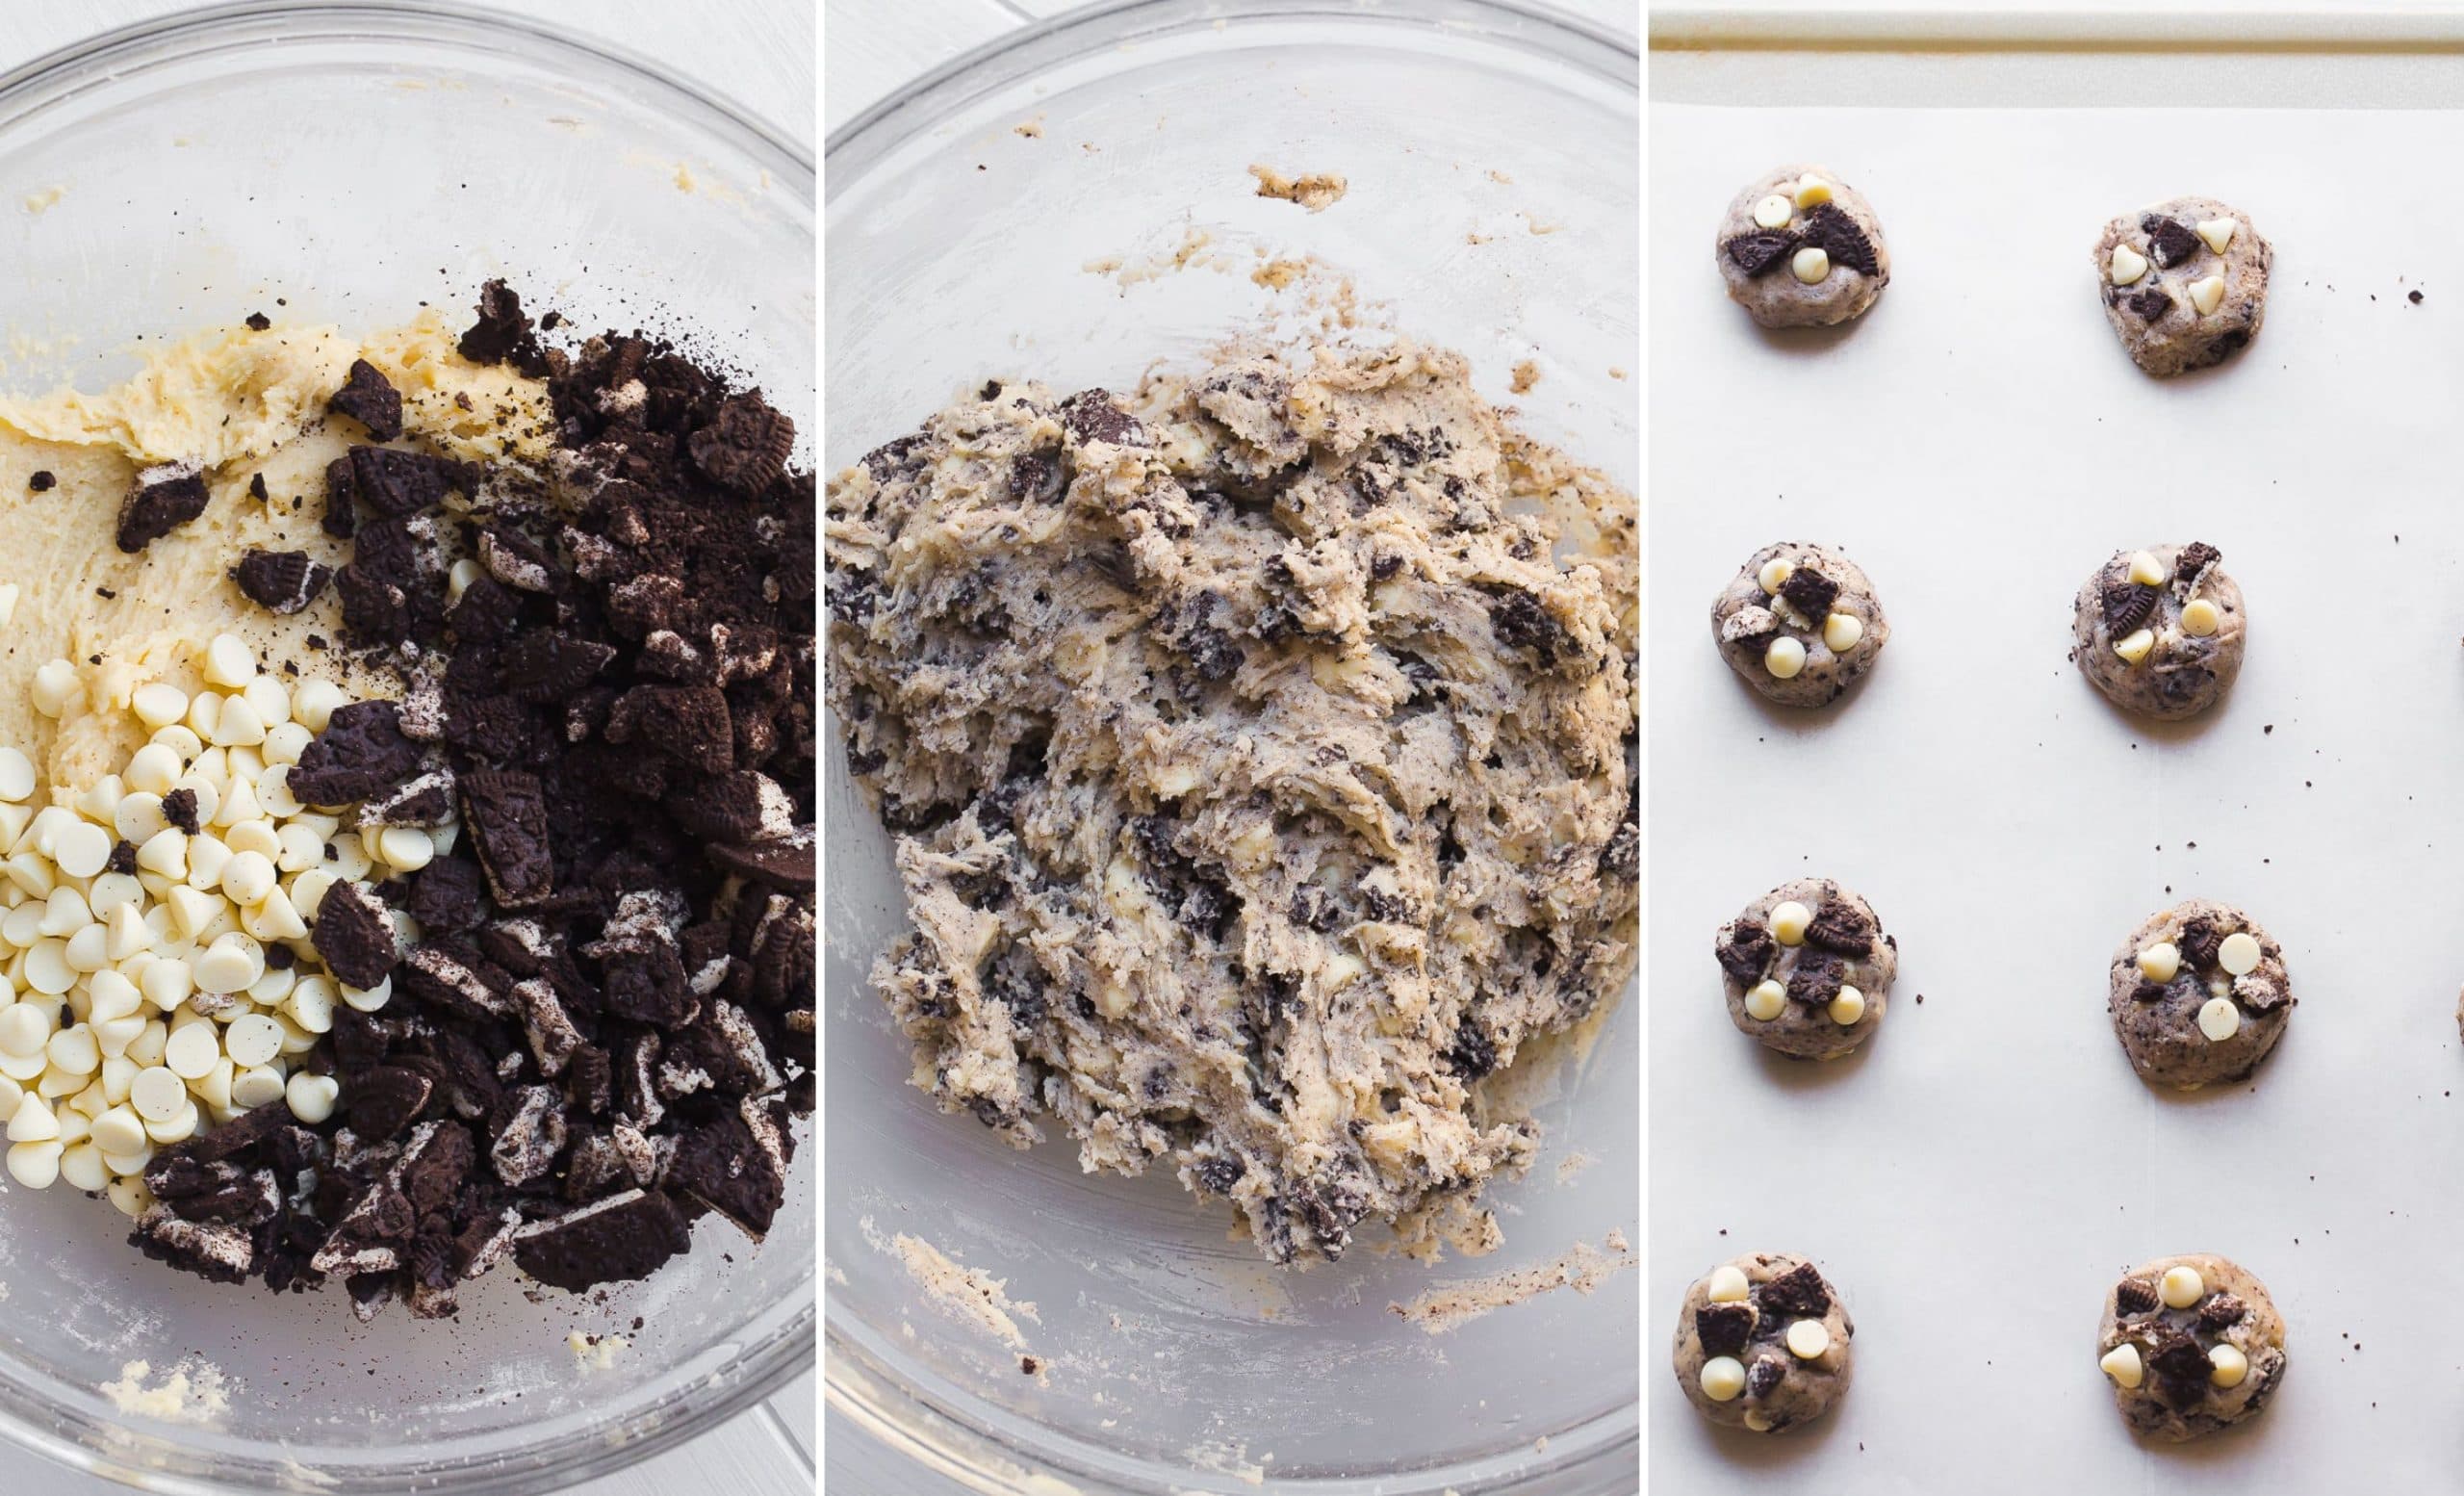 How to make Cookies and Cream Cookies step-by-step photos.